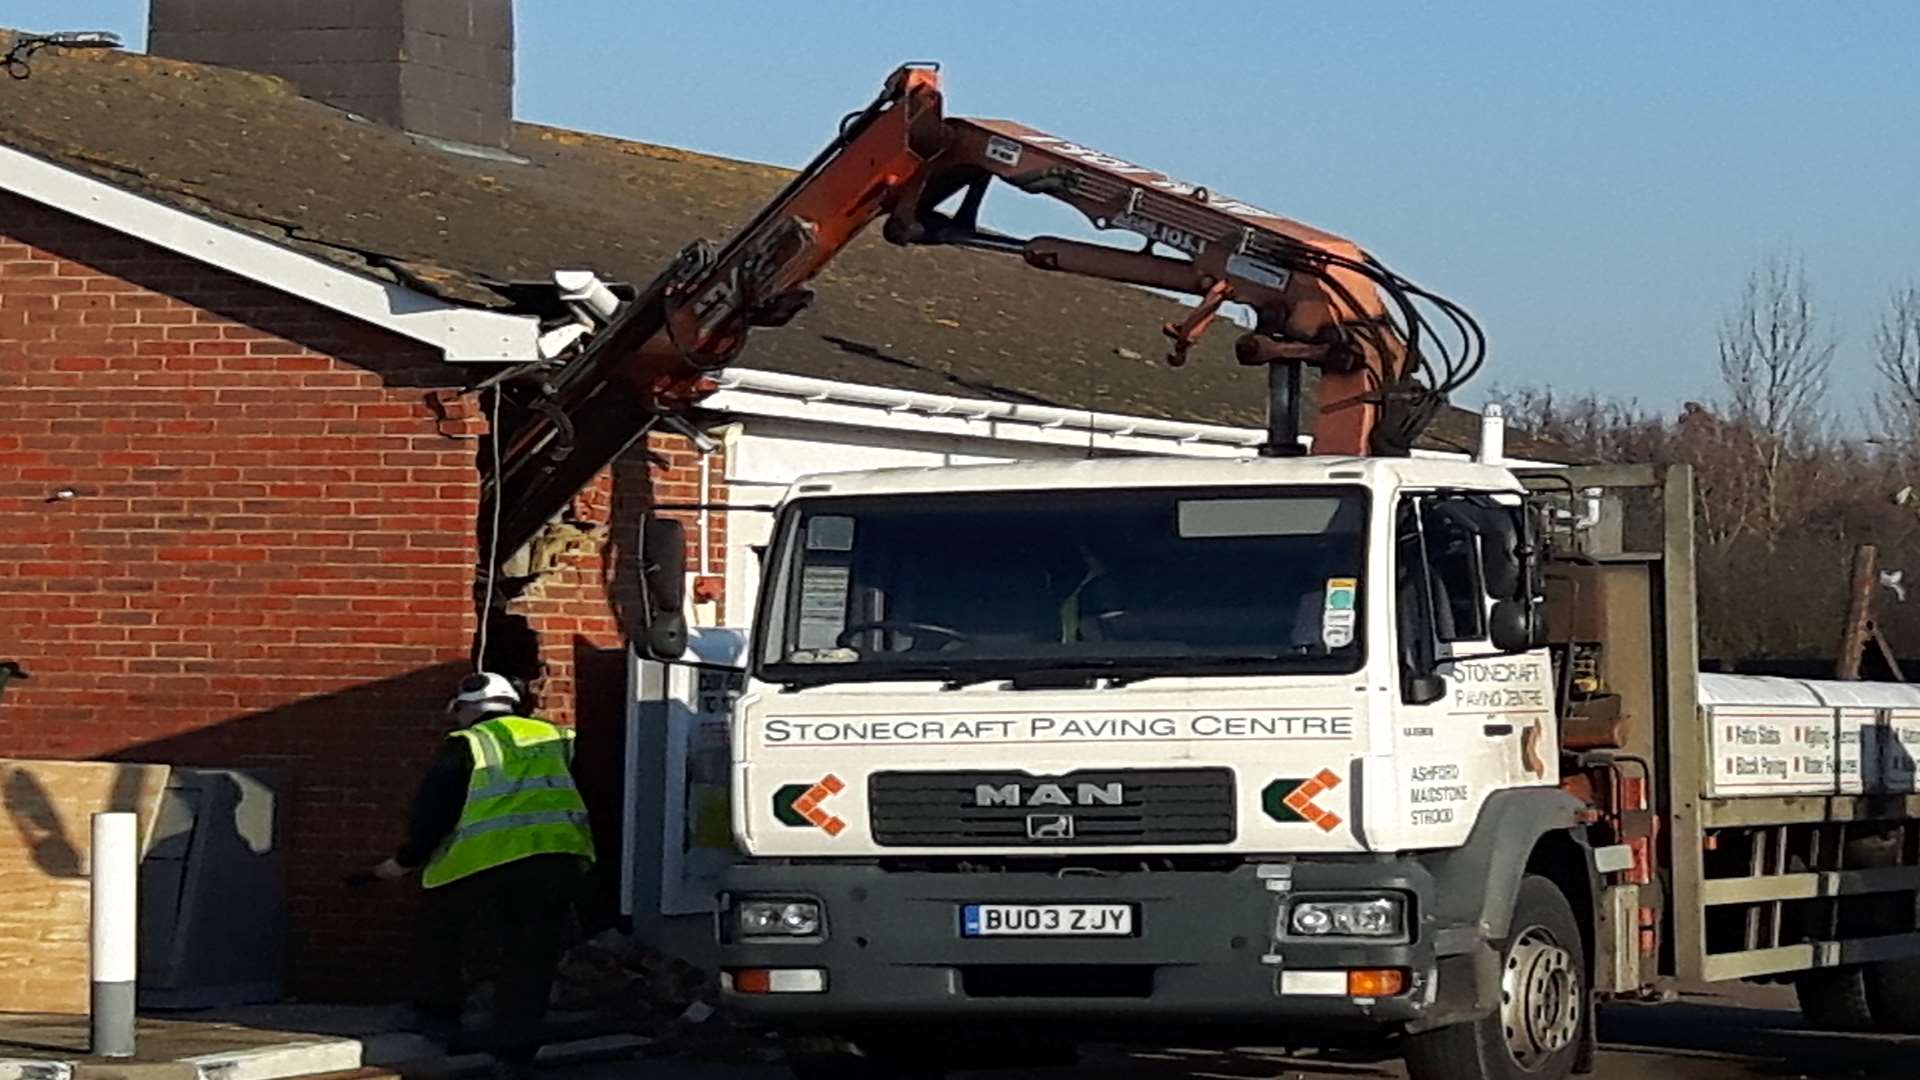 A crane was used to smash a hole in a brick wall